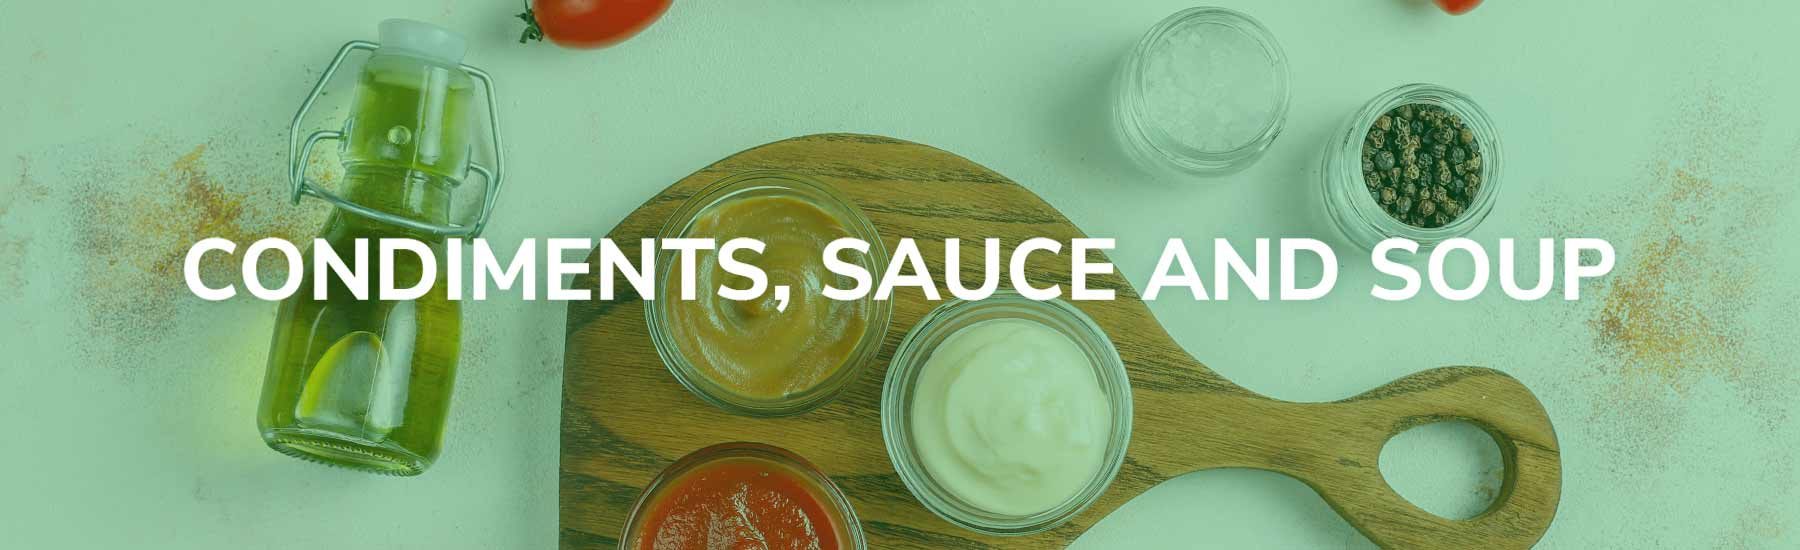 Gan Teck Kar Foods Condiments Sauces and Soup Products Supplier